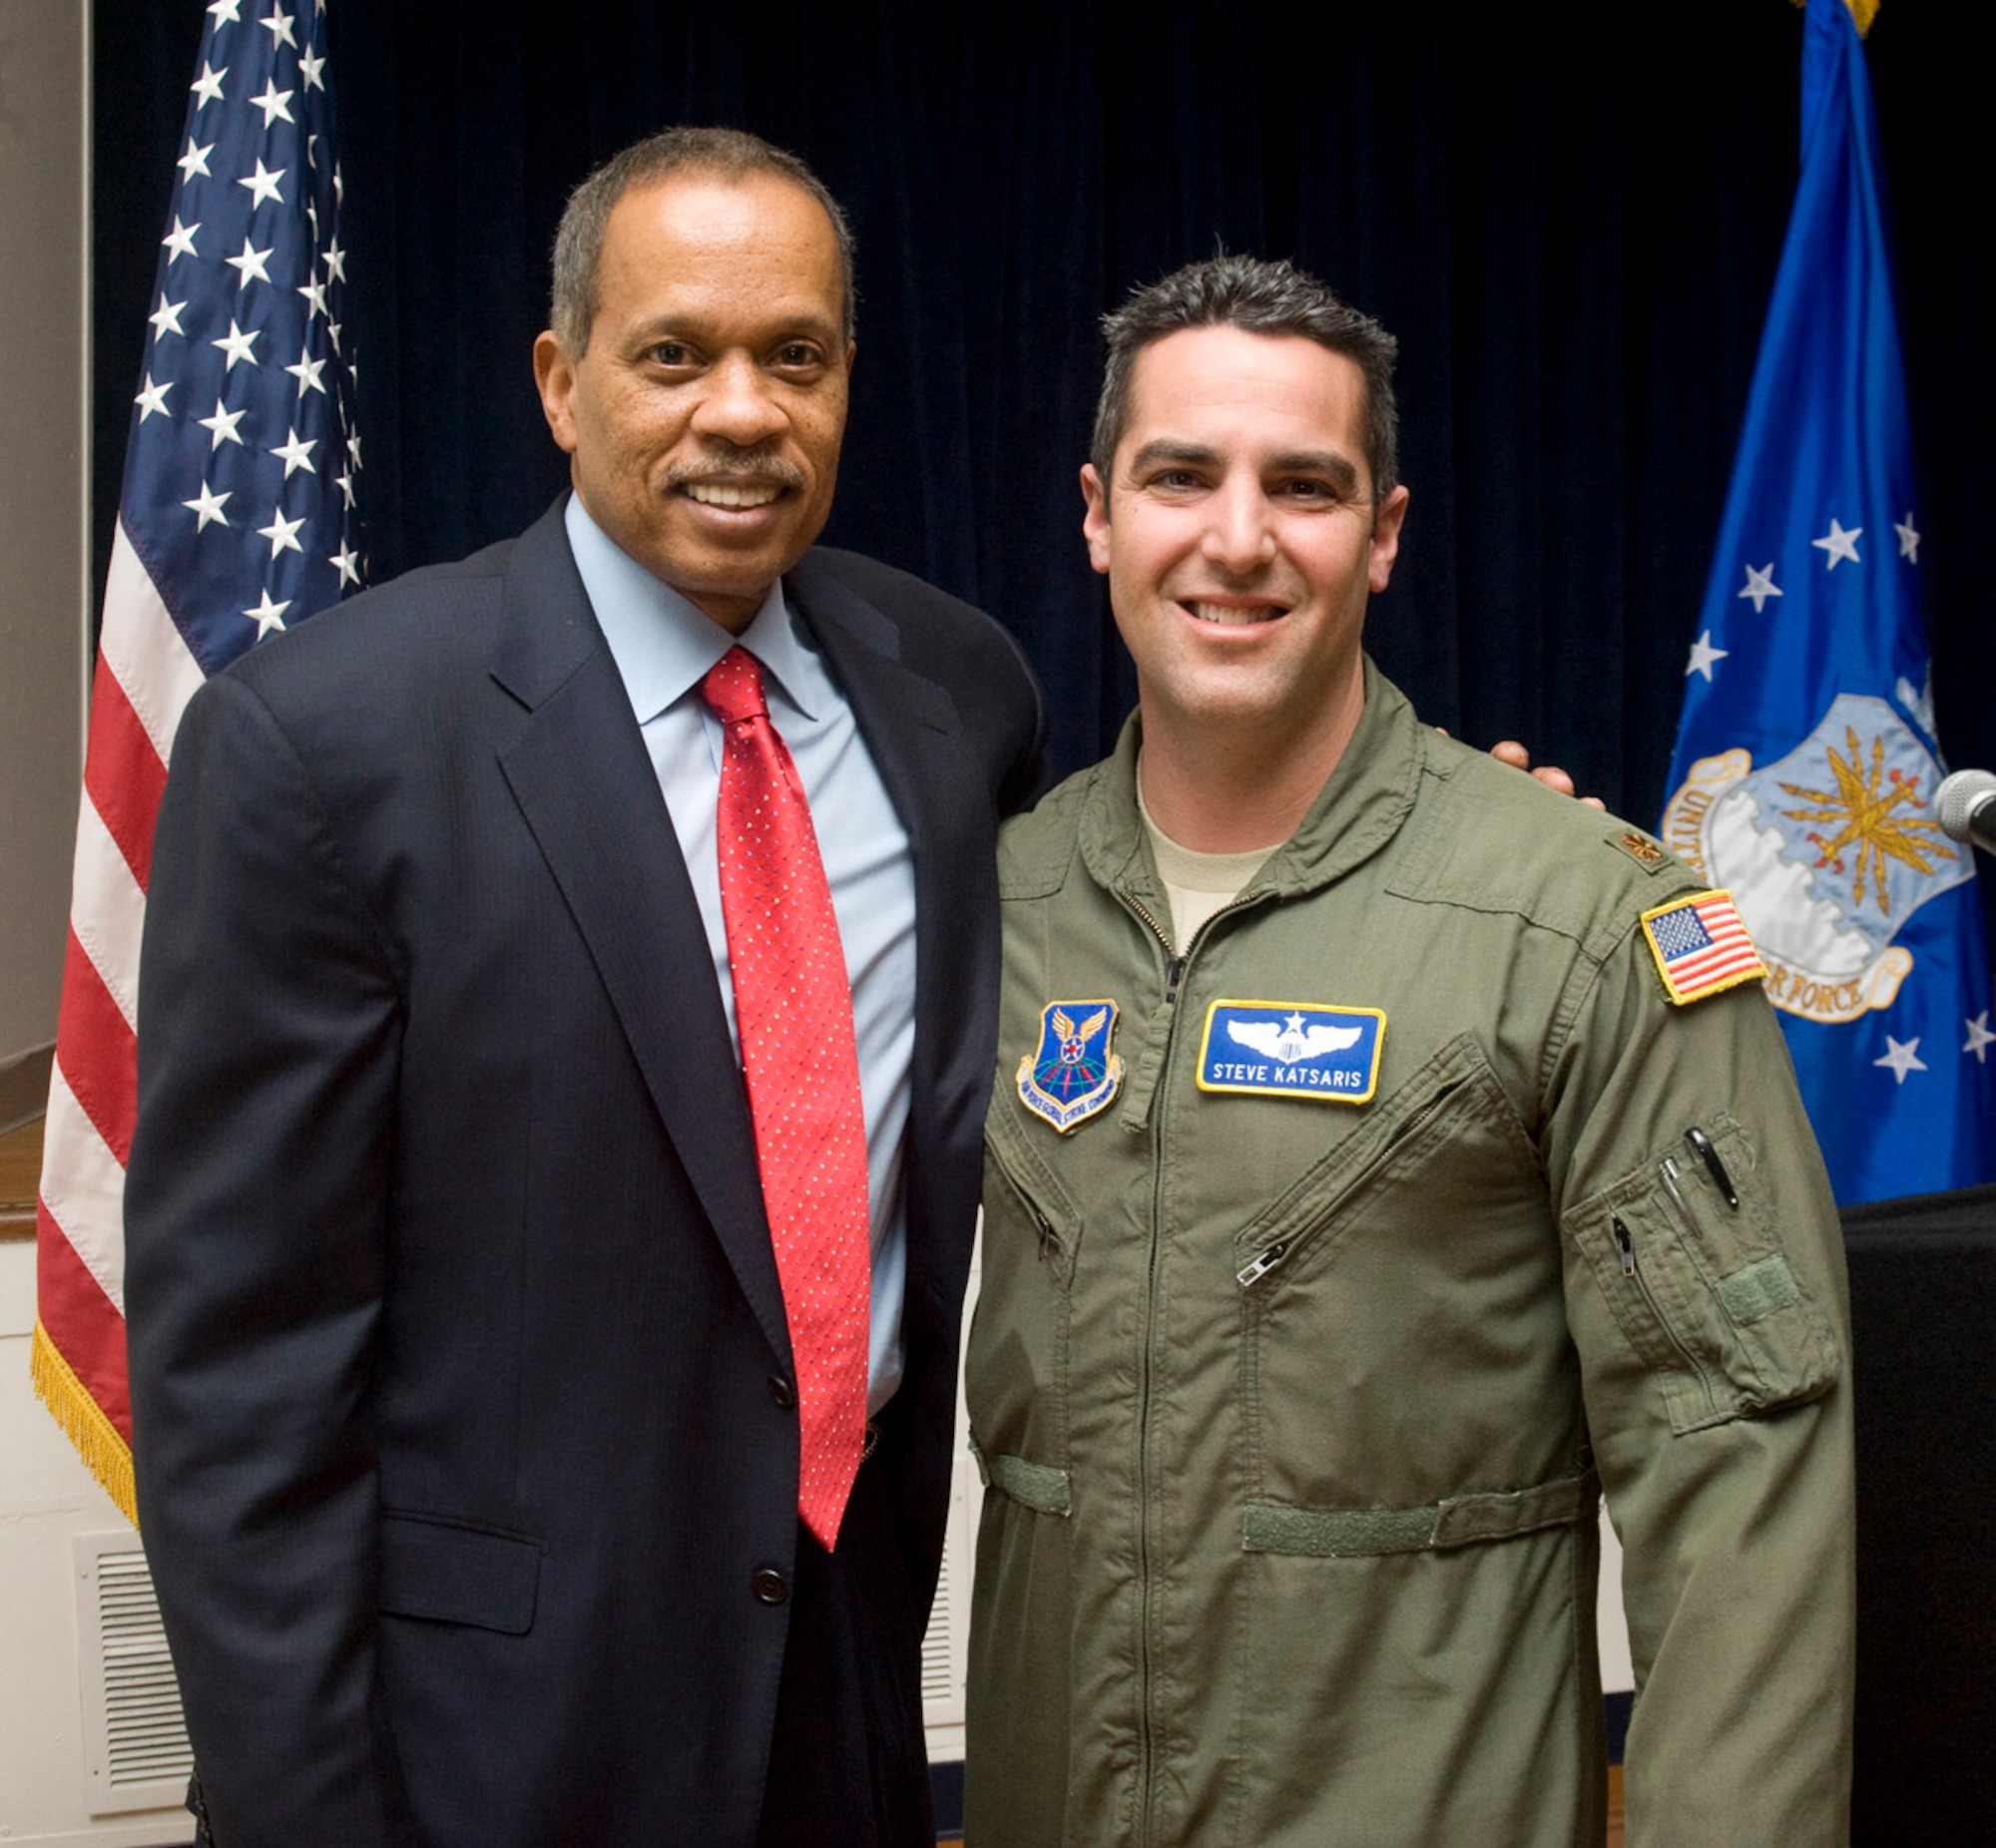 Maj. Steve Katsaris, Air Force Global Strike Command chief of helicopter training, poses for a photo with Juan Williams, Fox News contributor/analyst and on-air talent for “The Five”, at Andrews Air Force Base, Md., April 1, 2011. Katsaris has been in the Air Force more than 17 years and prior to his commission had been a prominent talent in the broadcasting world as a DJ. During his Air Force career, he has volunteered to be an emcee at various functions, including the Global Strike Challenge at Barksdale.